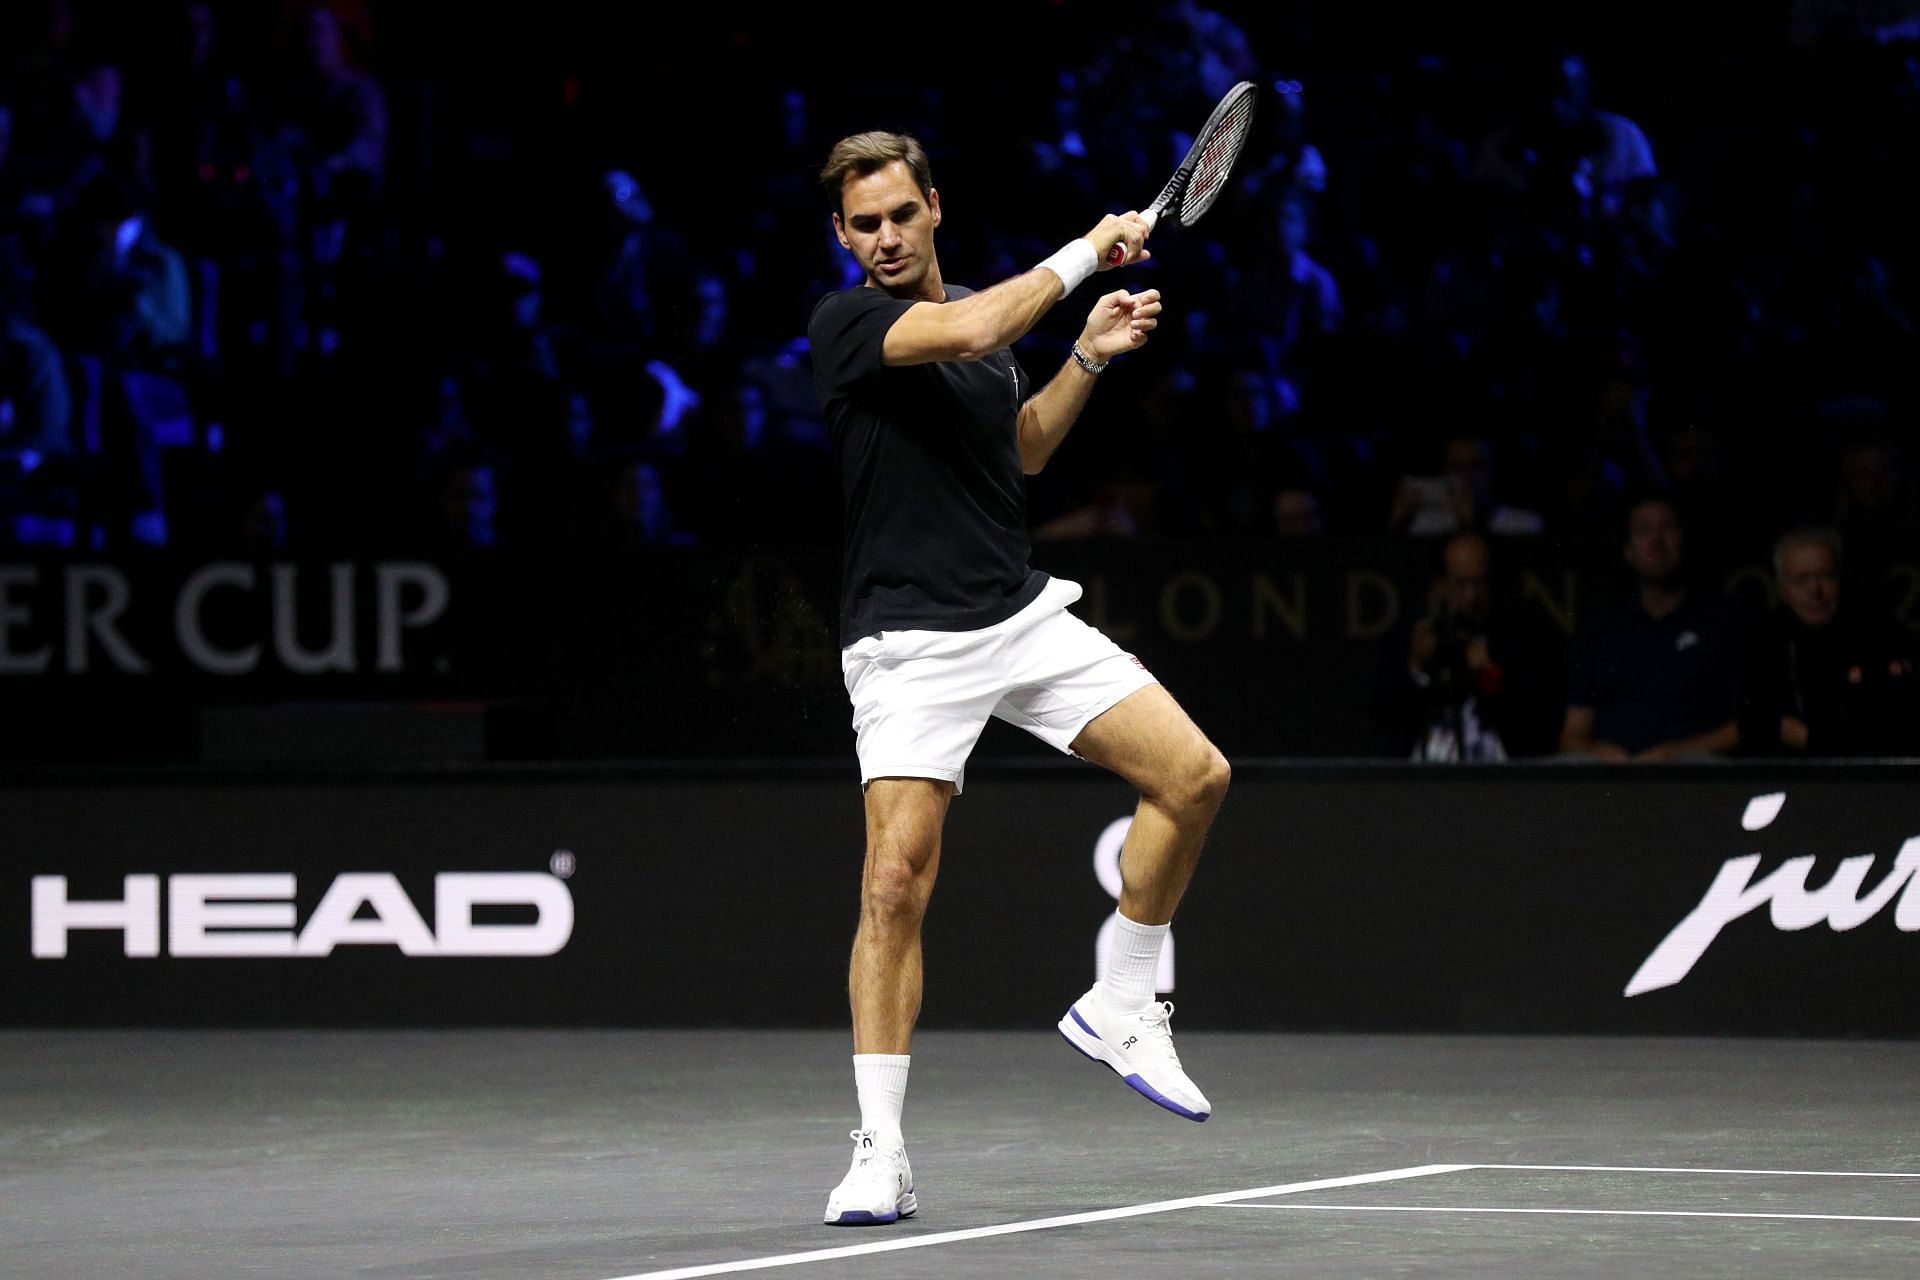 Roger Federer plays a shot during a practice session at the Laver Cup 2022